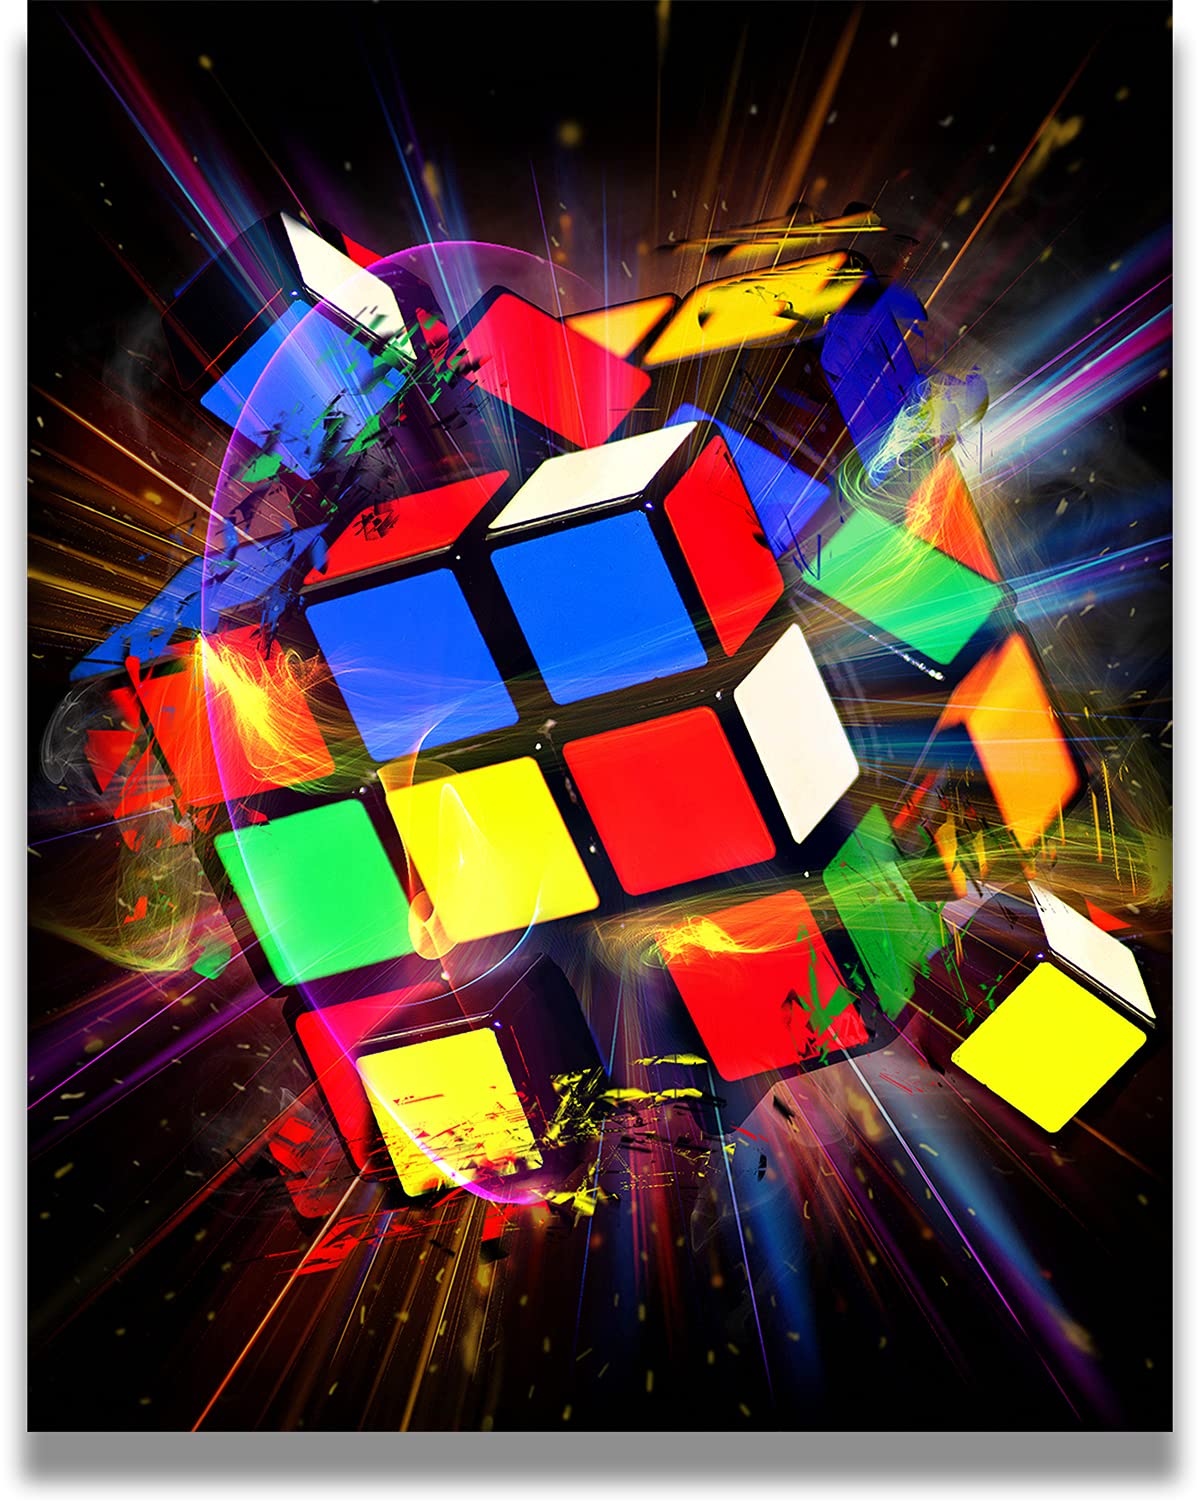 Exploding Rubik's Cube - Wall Art Decor Print with a black background